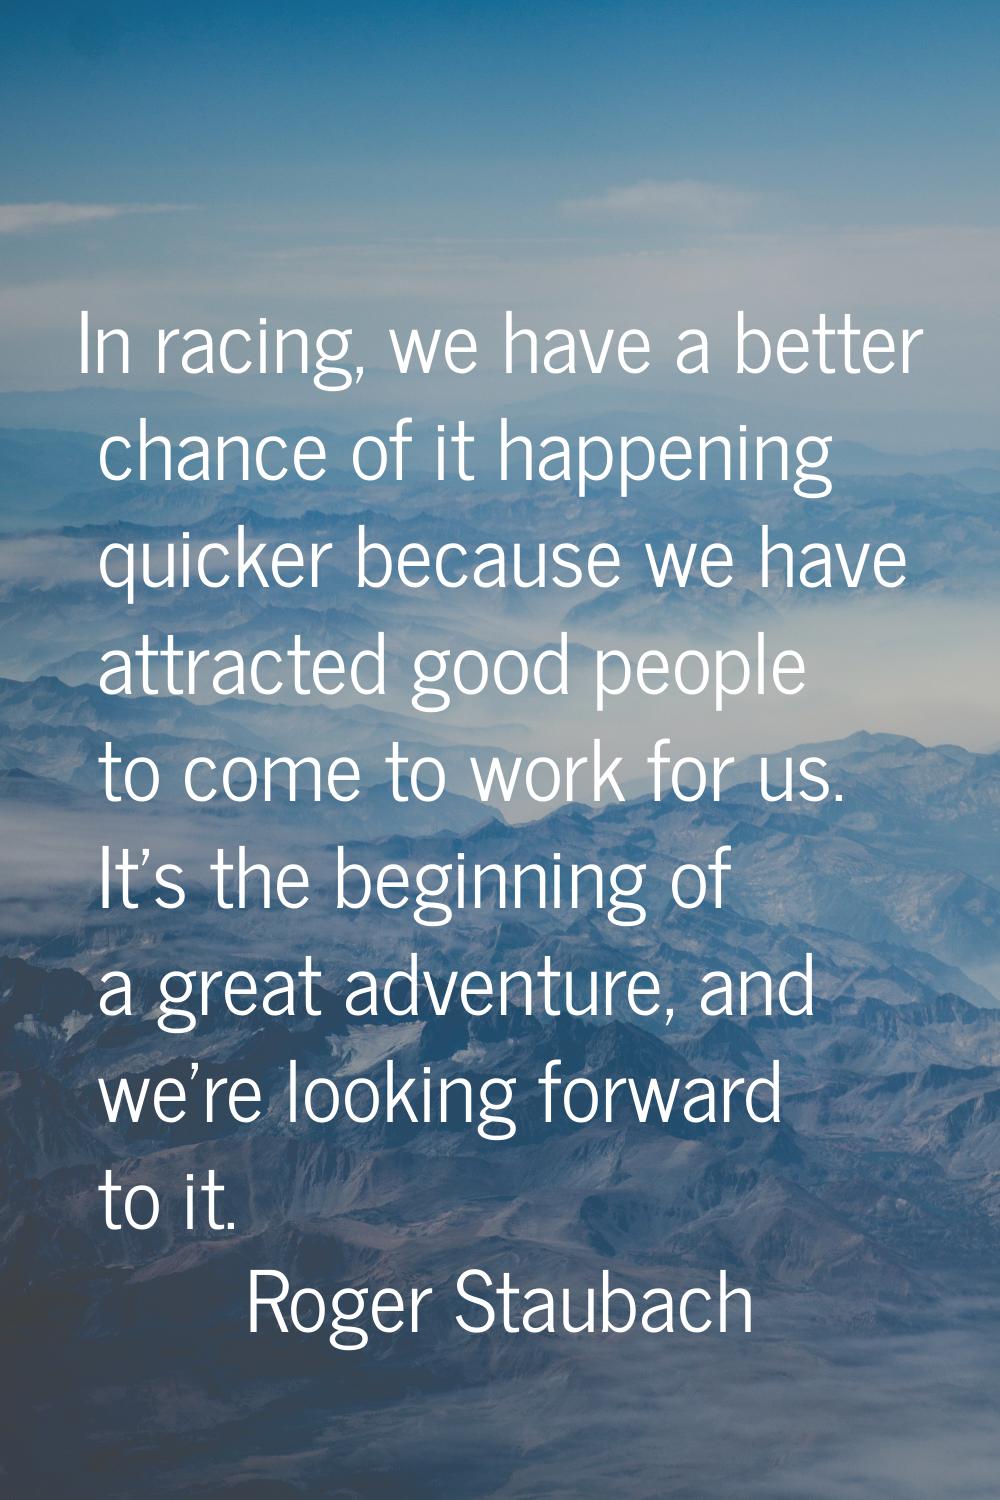 In racing, we have a better chance of it happening quicker because we have attracted good people to